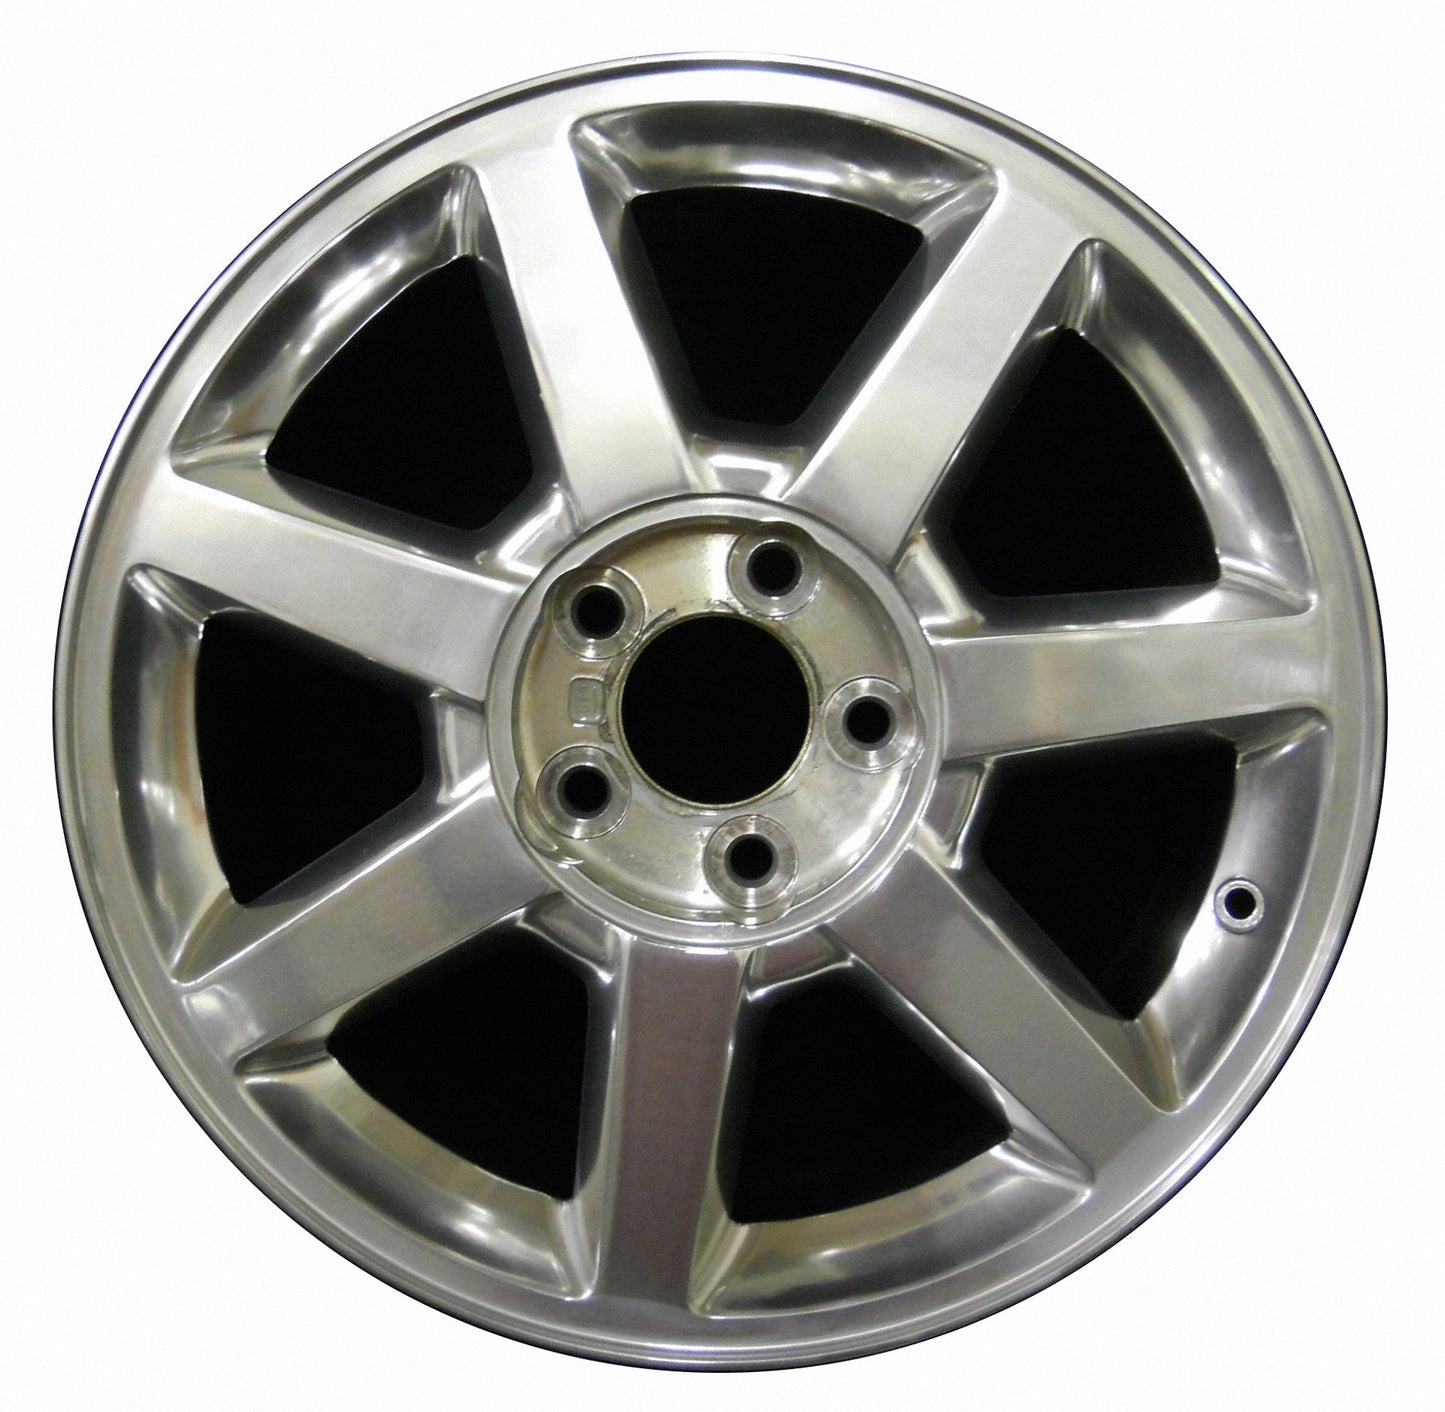 Cadillac STS  2004, 2005, 2006, 2007, 2008, 2009, 2010, 2011 Factory OEM Car Wheel Size 17x7.5 Alloy WAO.4578FT.FULL.POL